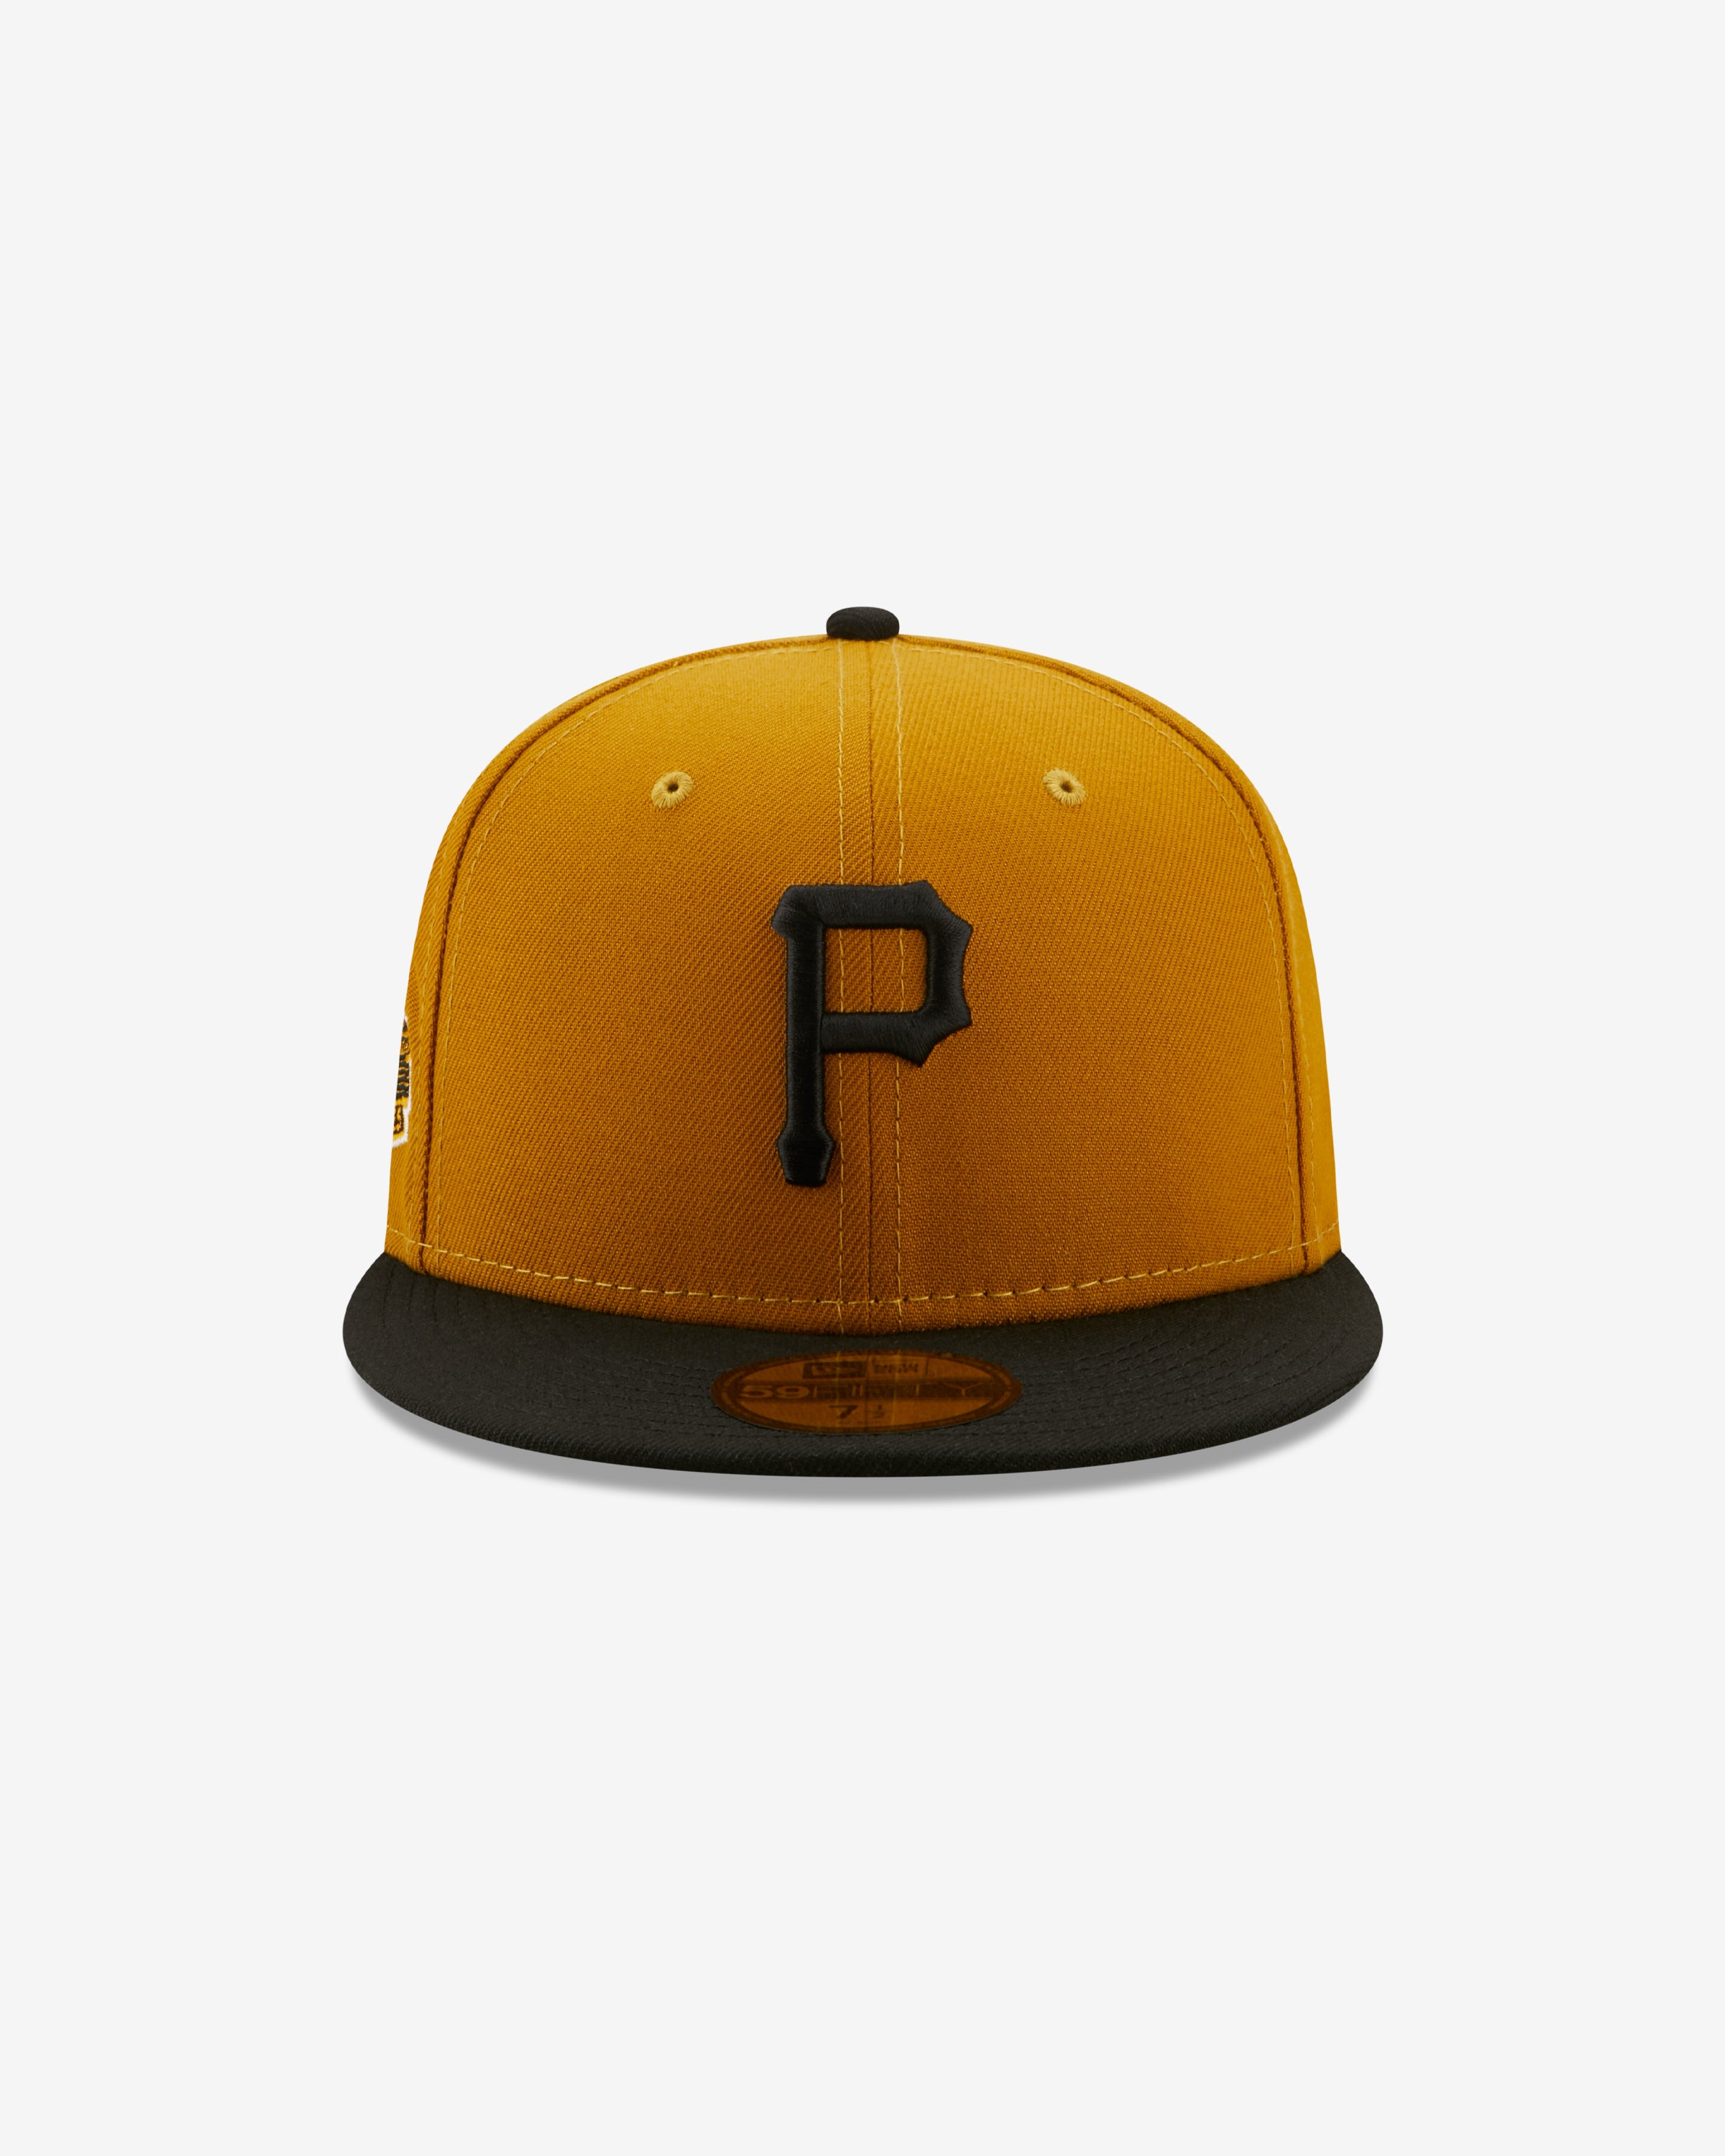 NEW ERA LOGO HISTORY 59FIFTY FITTED - PITTSBURGH PIRATES (1971)